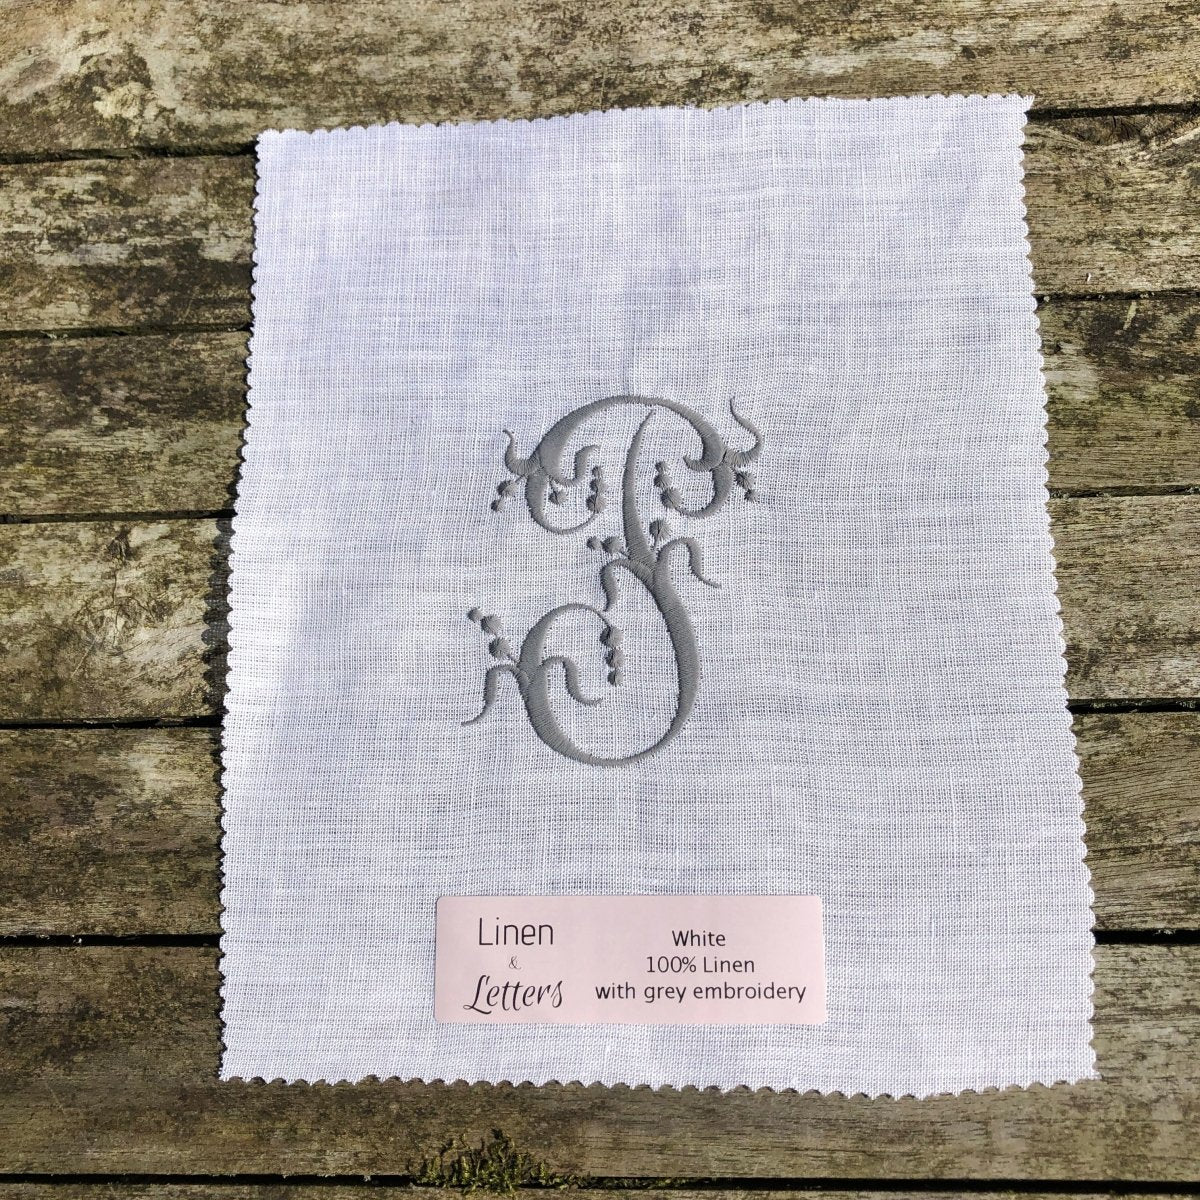 Fabric Samples - Linen and Letters